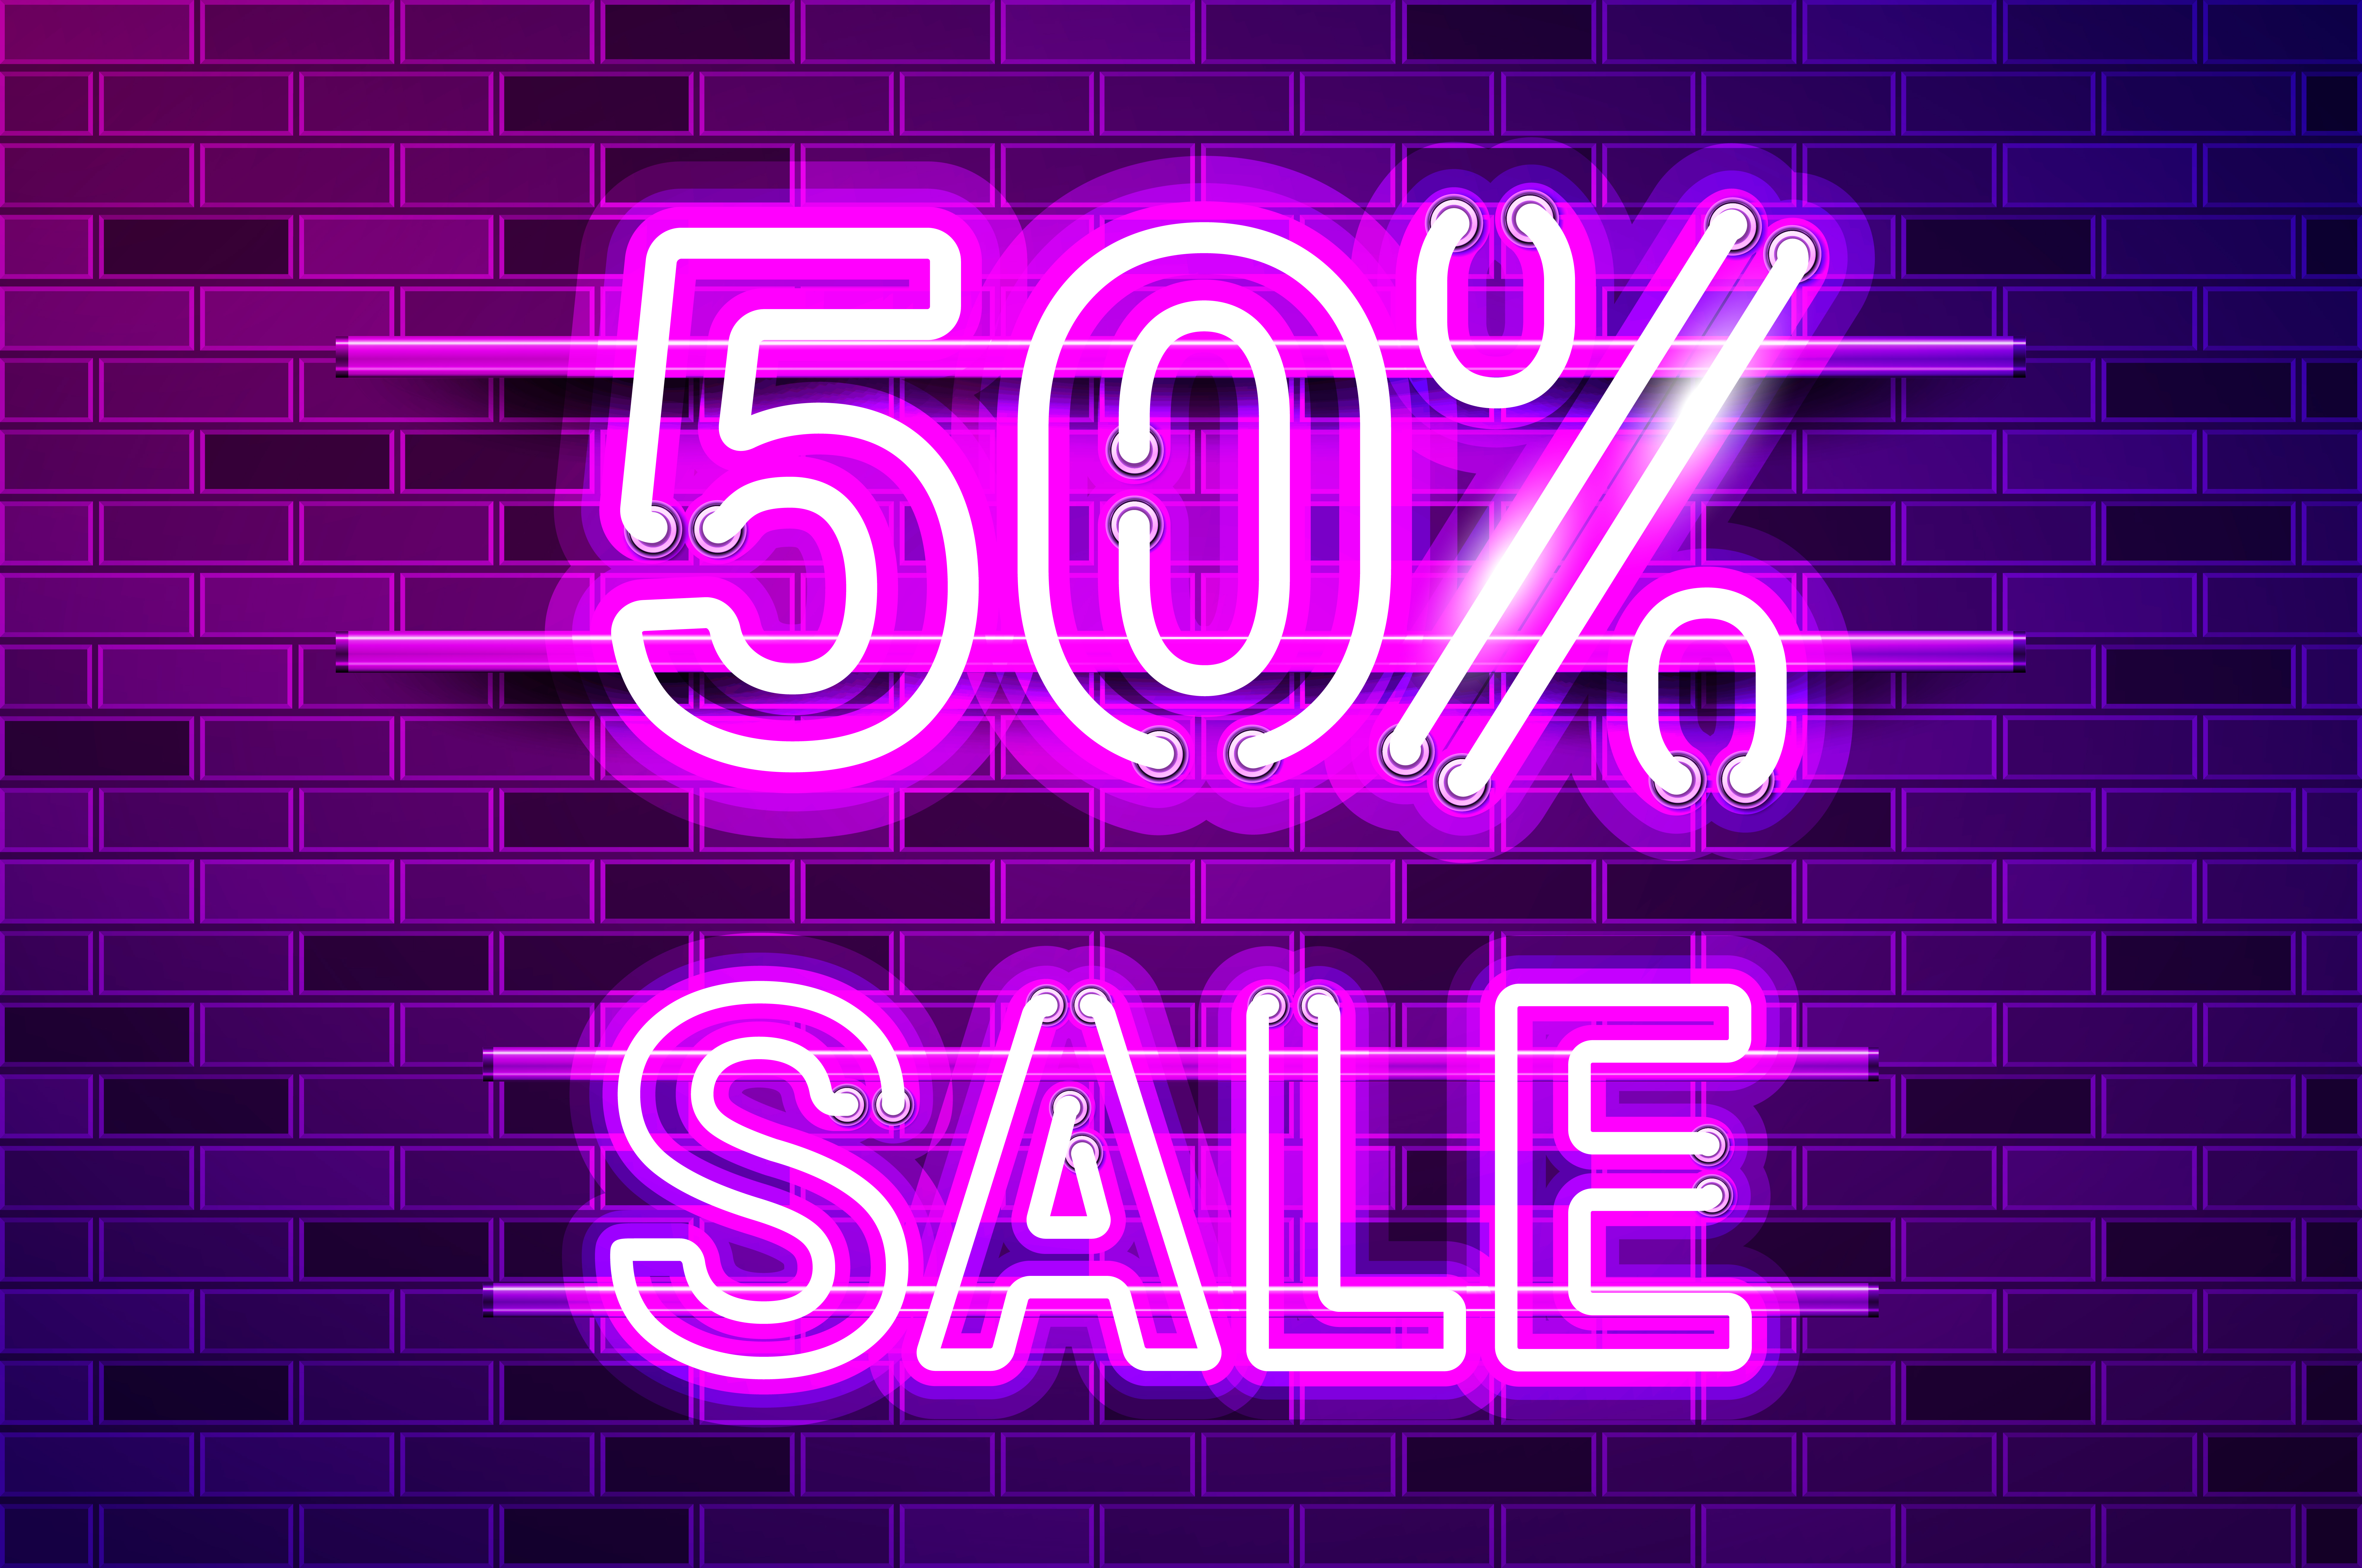 50 percent SALE glowing neon lamp sign. Realistic vector illustration. Purple brick wall, violet glow, metal holders.. 50 percent SALE glowing purple neon lamp sign